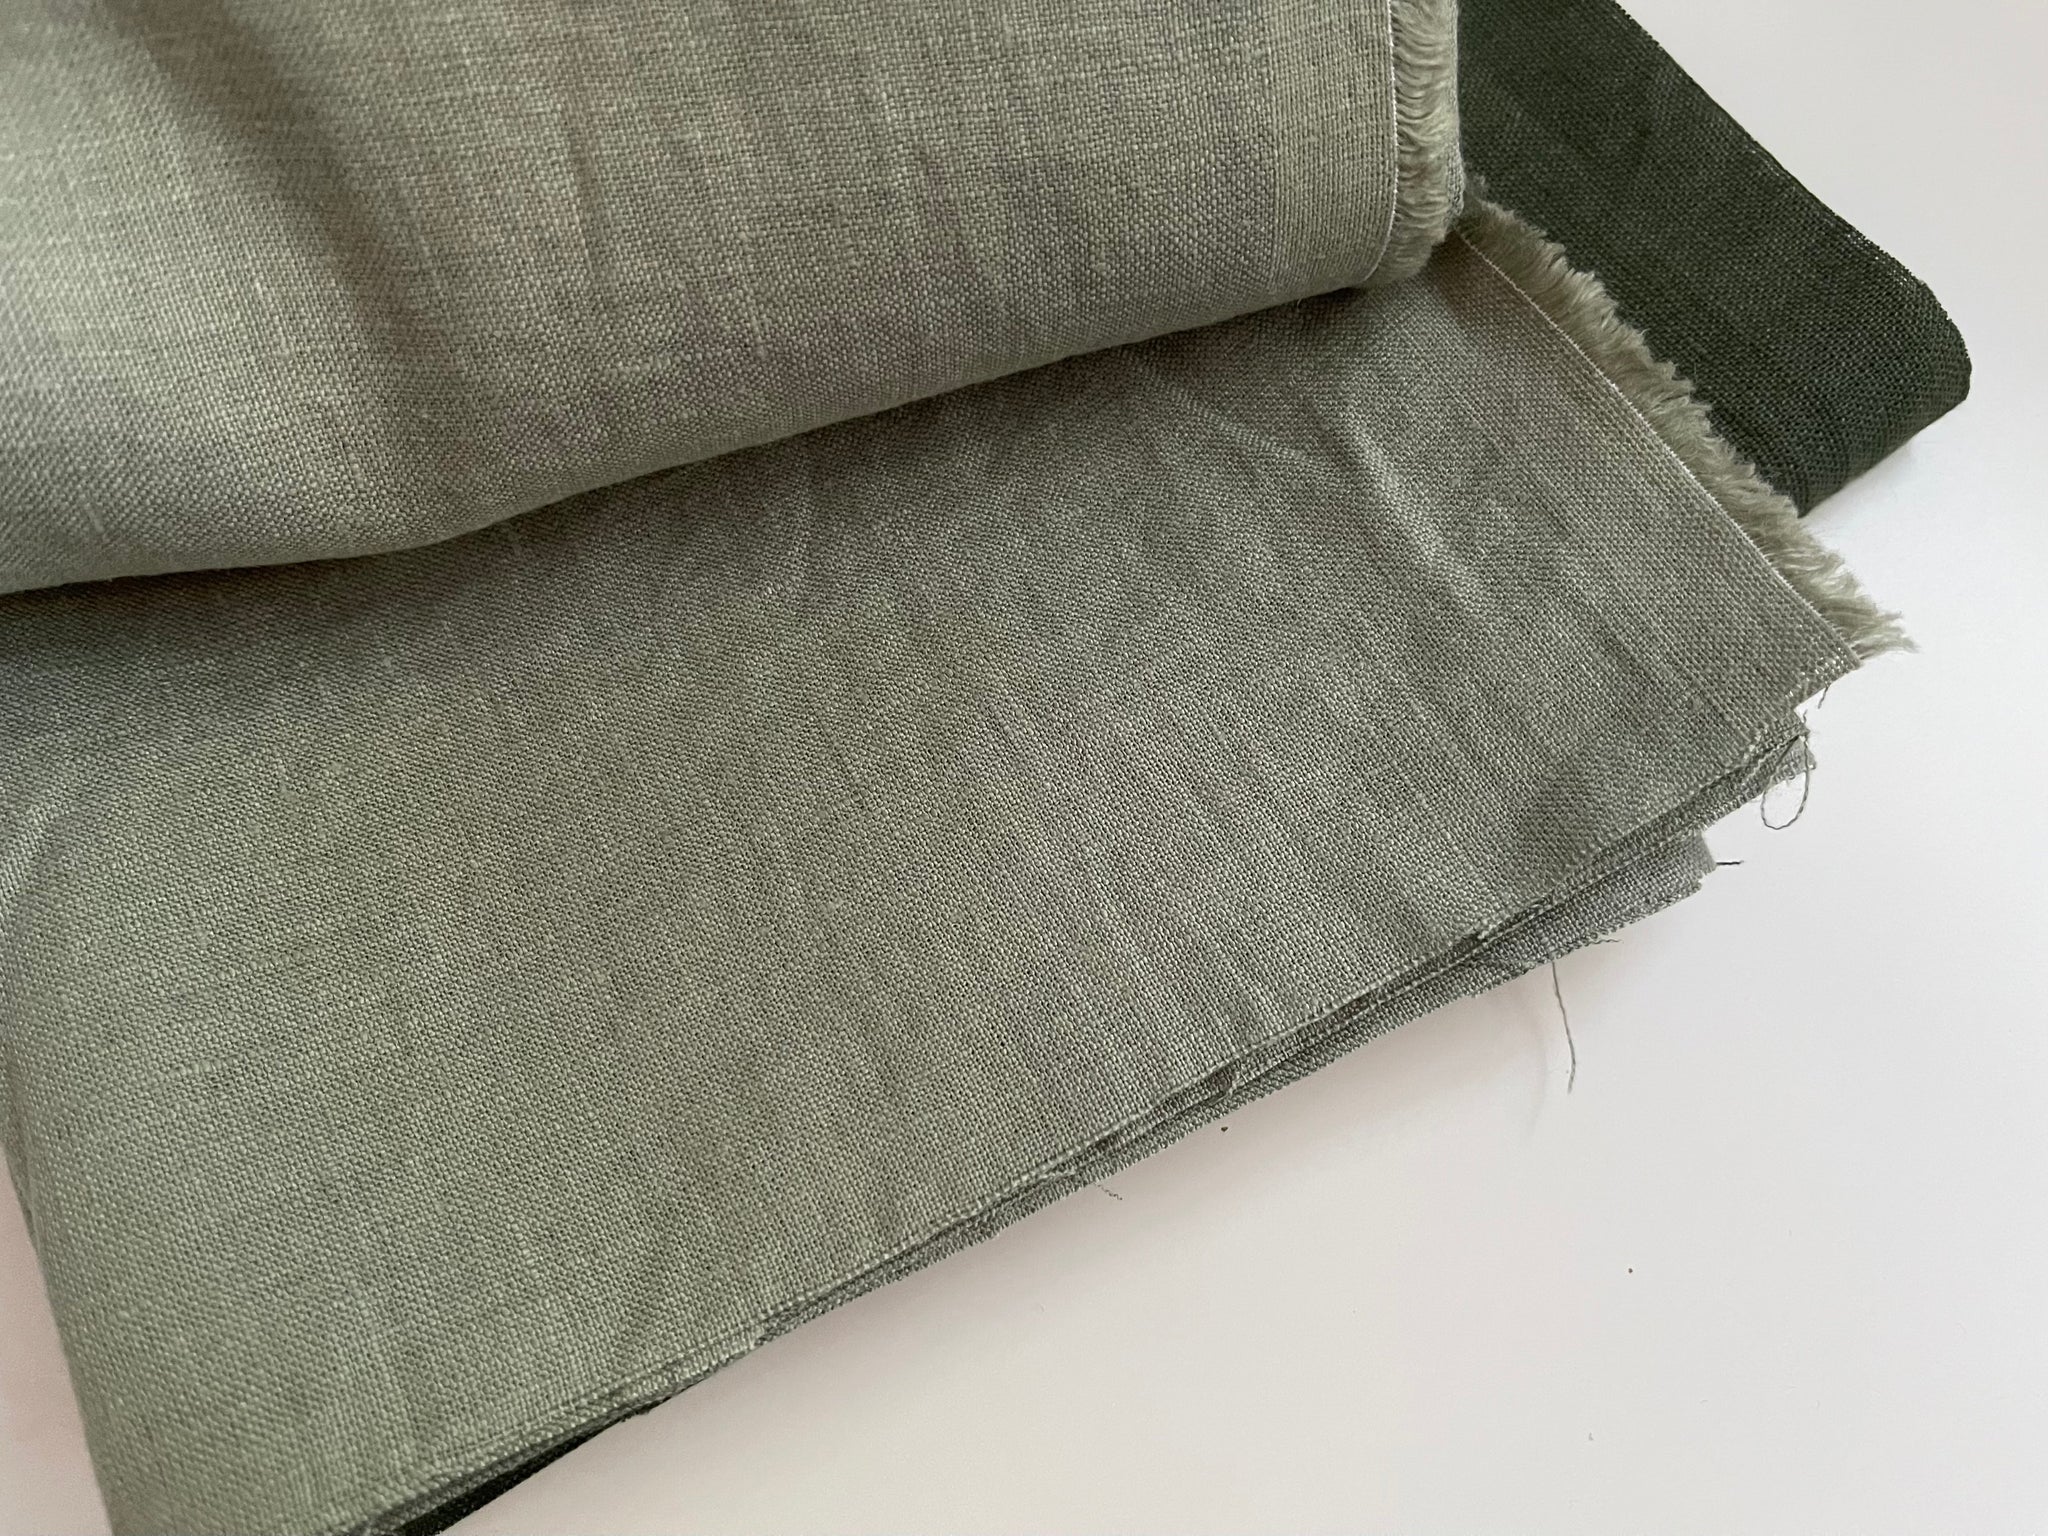 Linen Fabric Remnants - Sage Green and Beetle